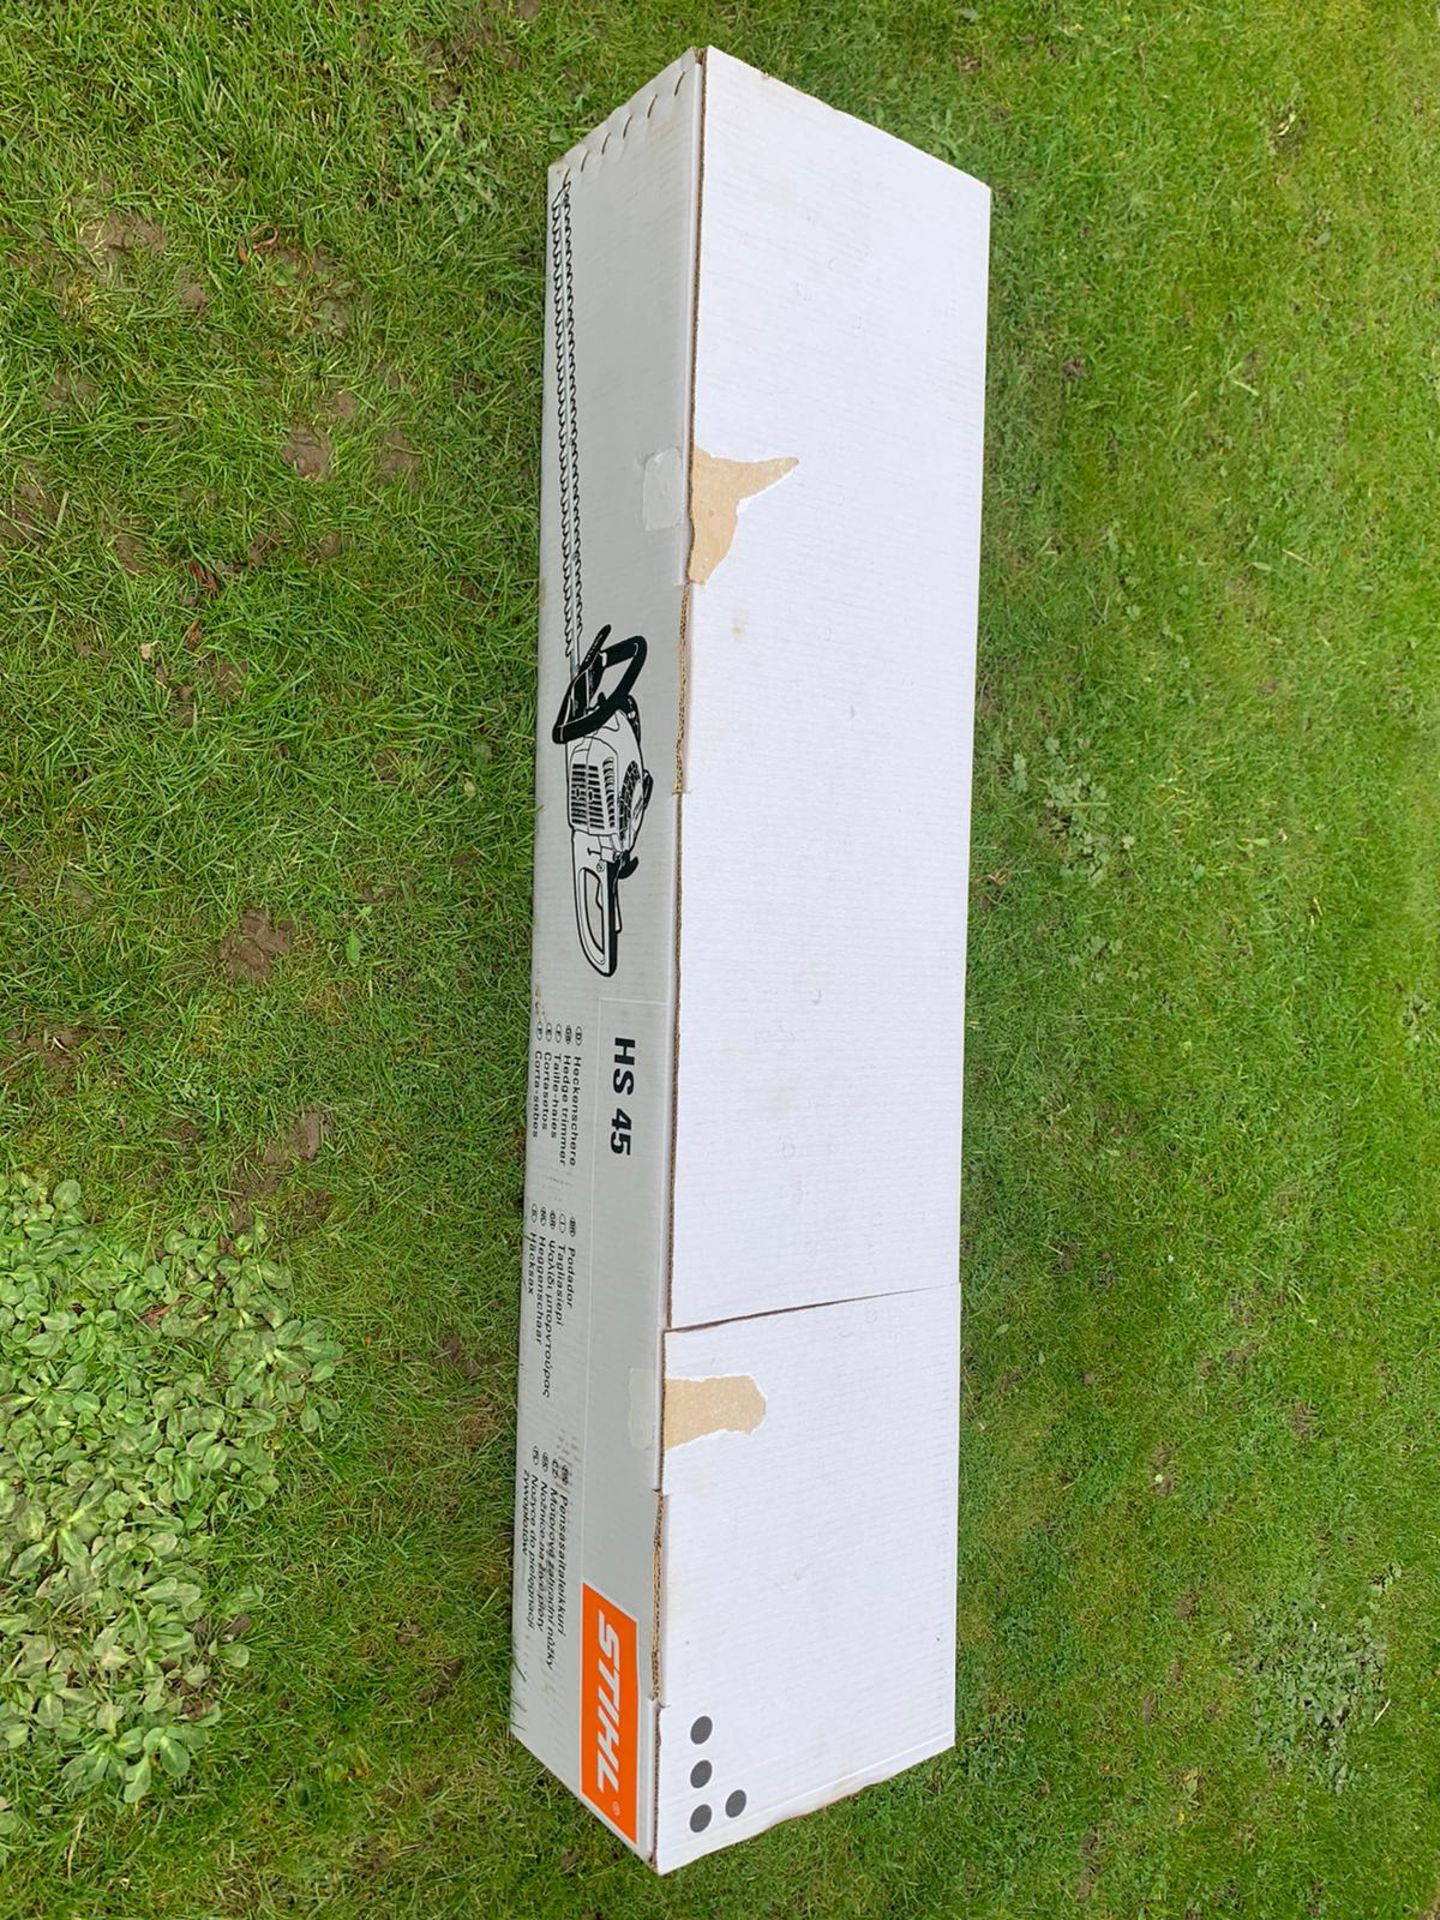 BRAND NEW AND UNUSED STIHL HS45 HEDGE CUTTER, 24" BLADE, COMES WITH MANUAL *NO VAT* - Image 2 of 3